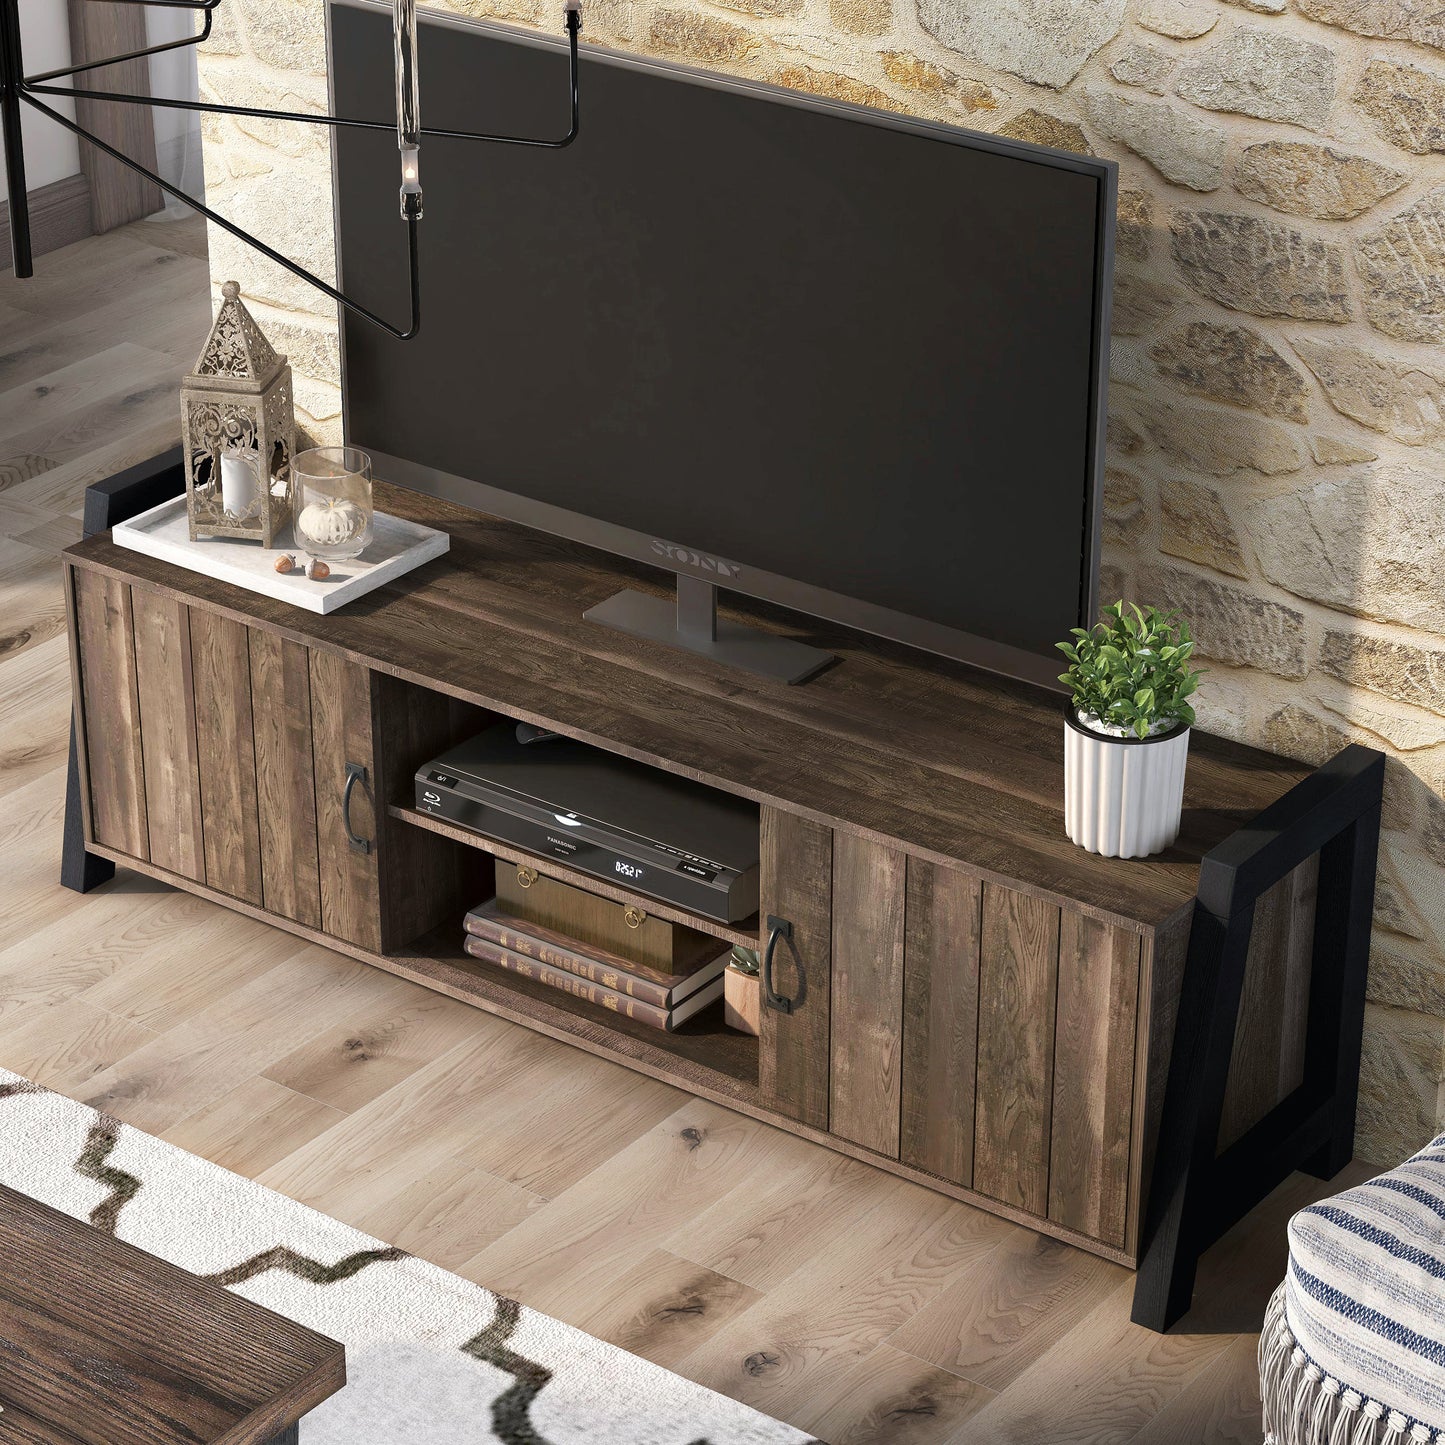 Left angled bird's eye view of a farmhouse reclaimed oak and black six-shelf TV stand in a living room with accessories